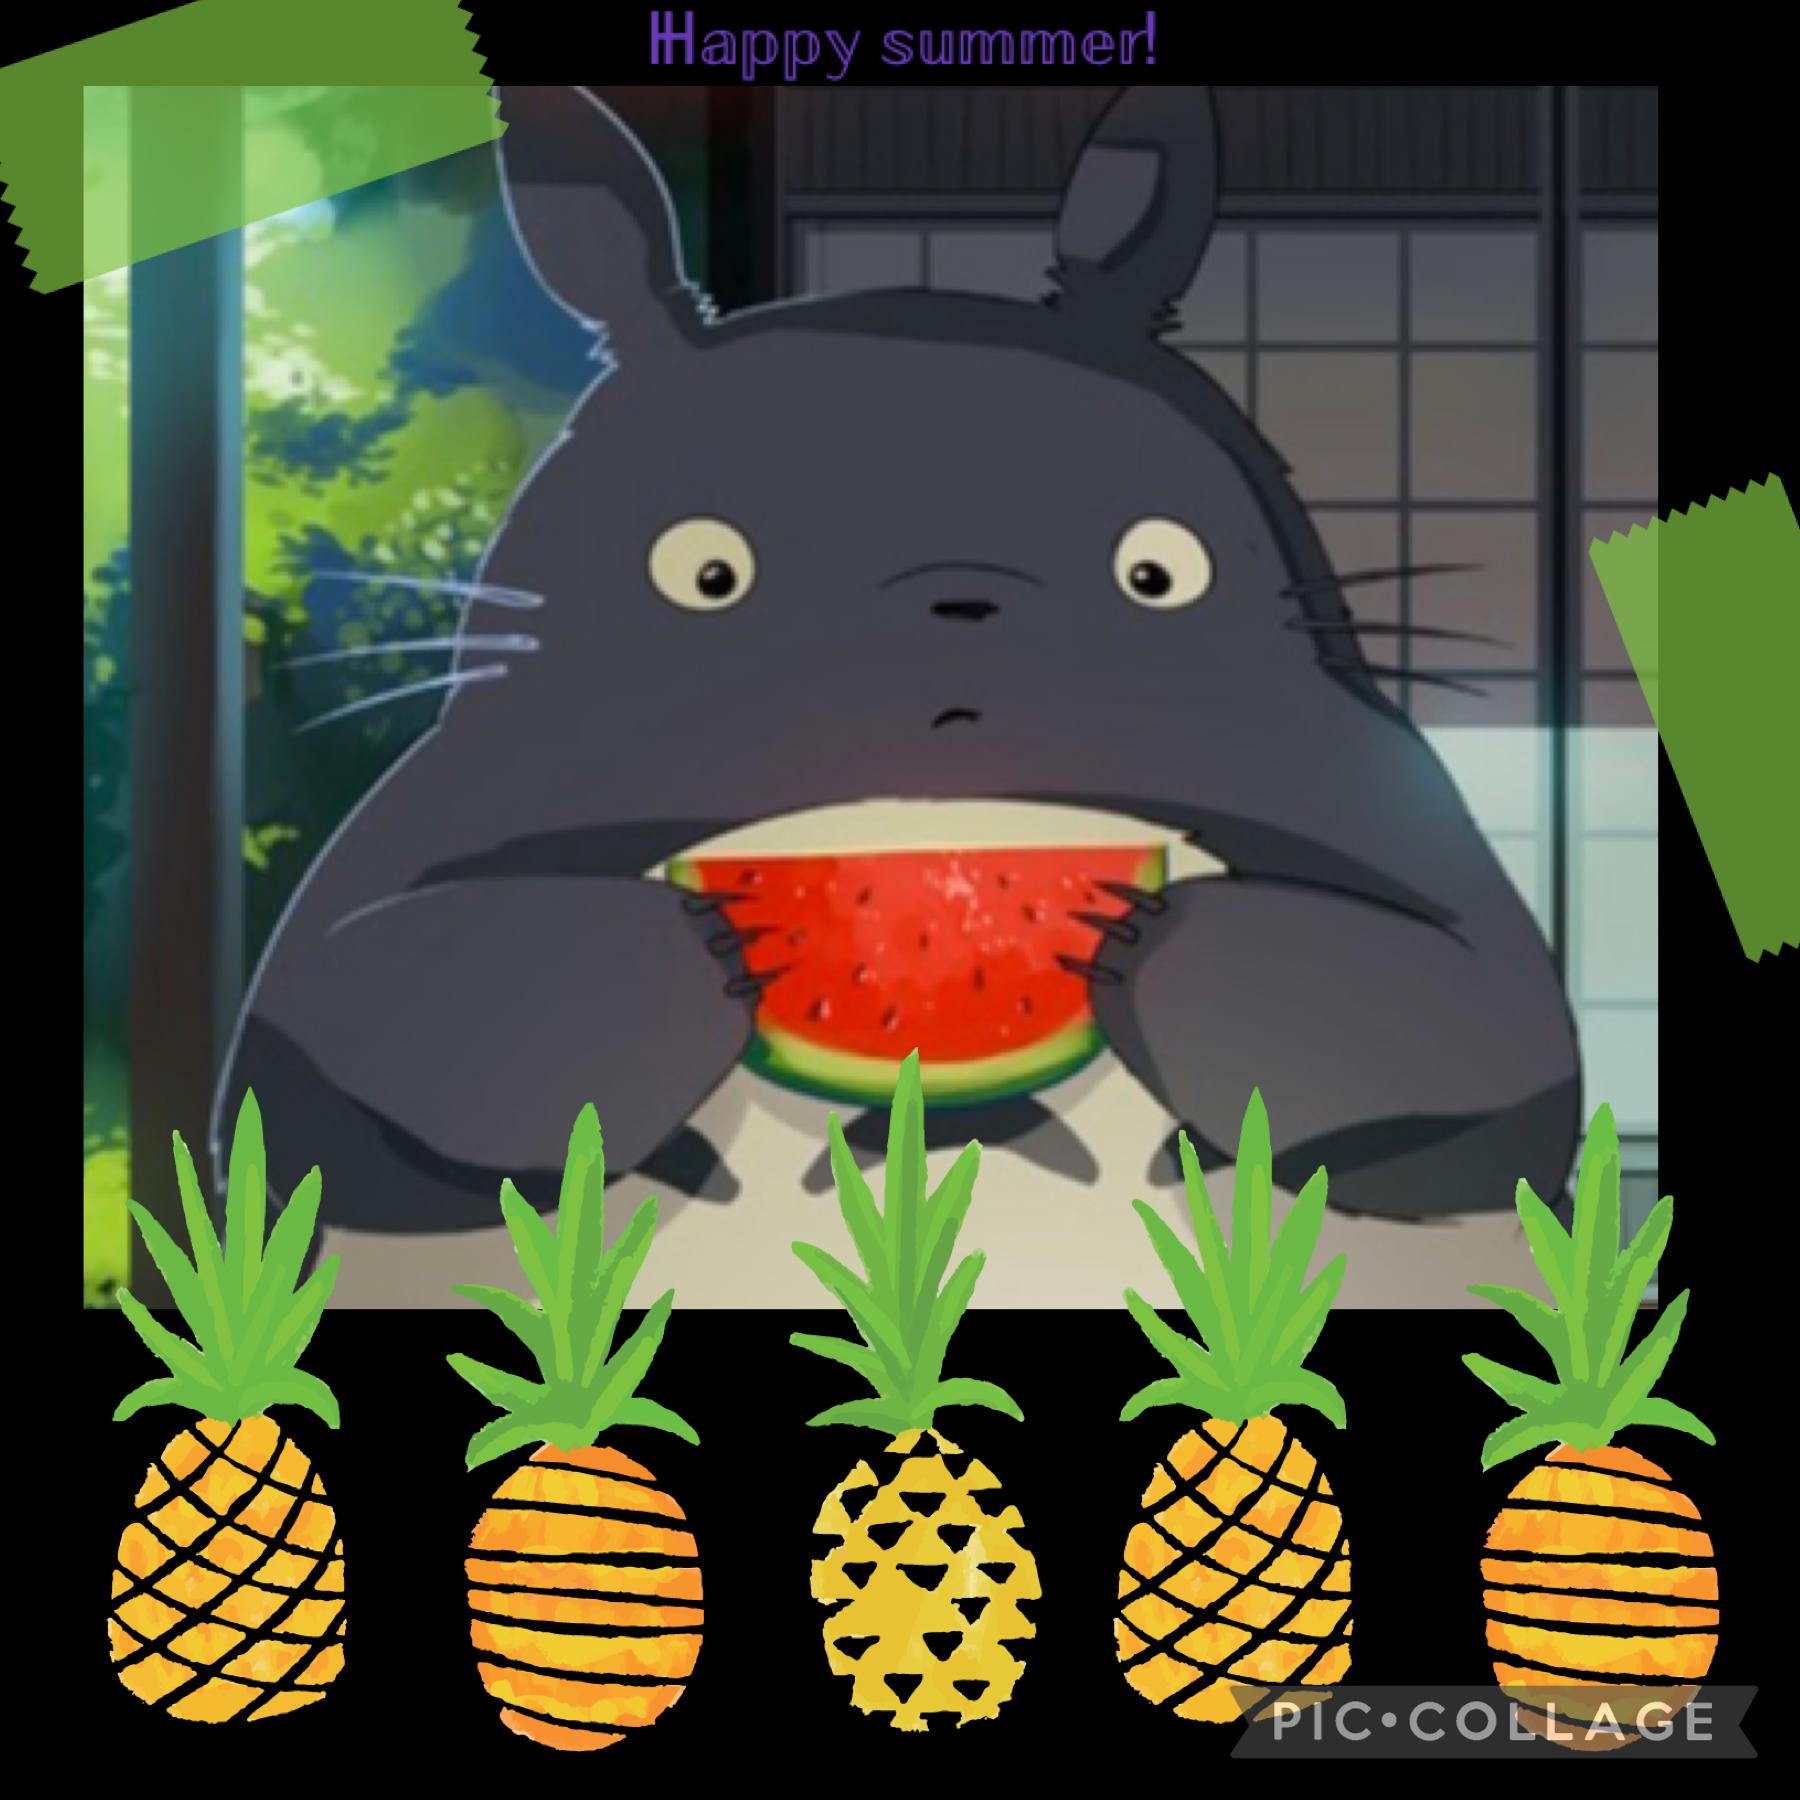 🍍Tap🍍

Happy summer! Enjoy totoro with me! 